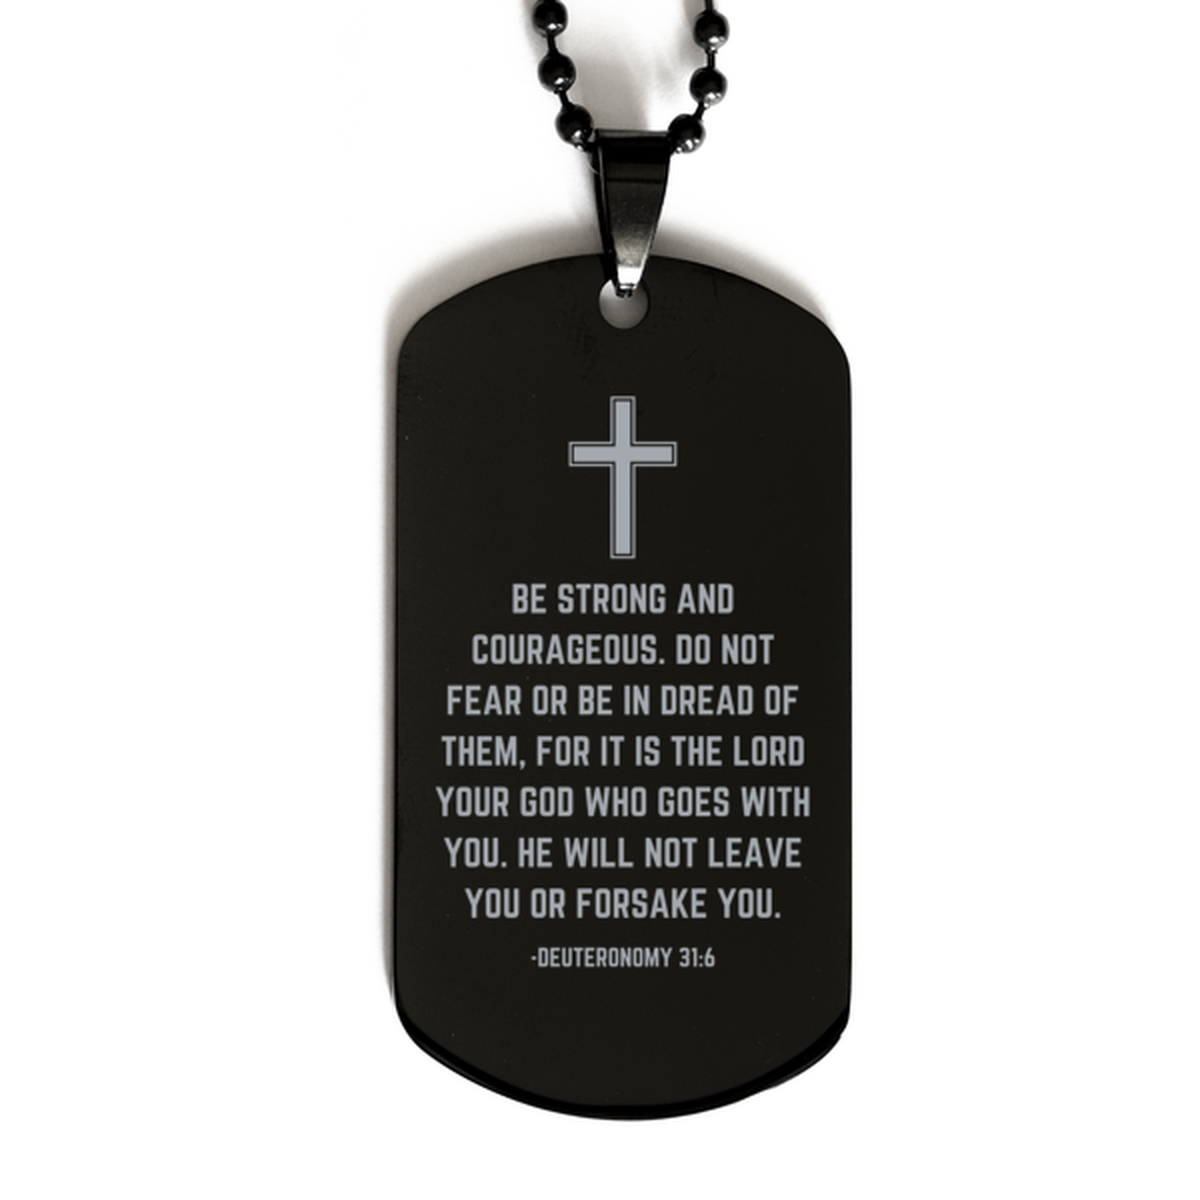 Baptism Gifts For Teenage Boys Girls, Christian Bible Verse Black Dog Tag, Be strong and courageous, Confirmation Gifts, Bible Verse Necklace for Son, Godson, Grandson, Nephew